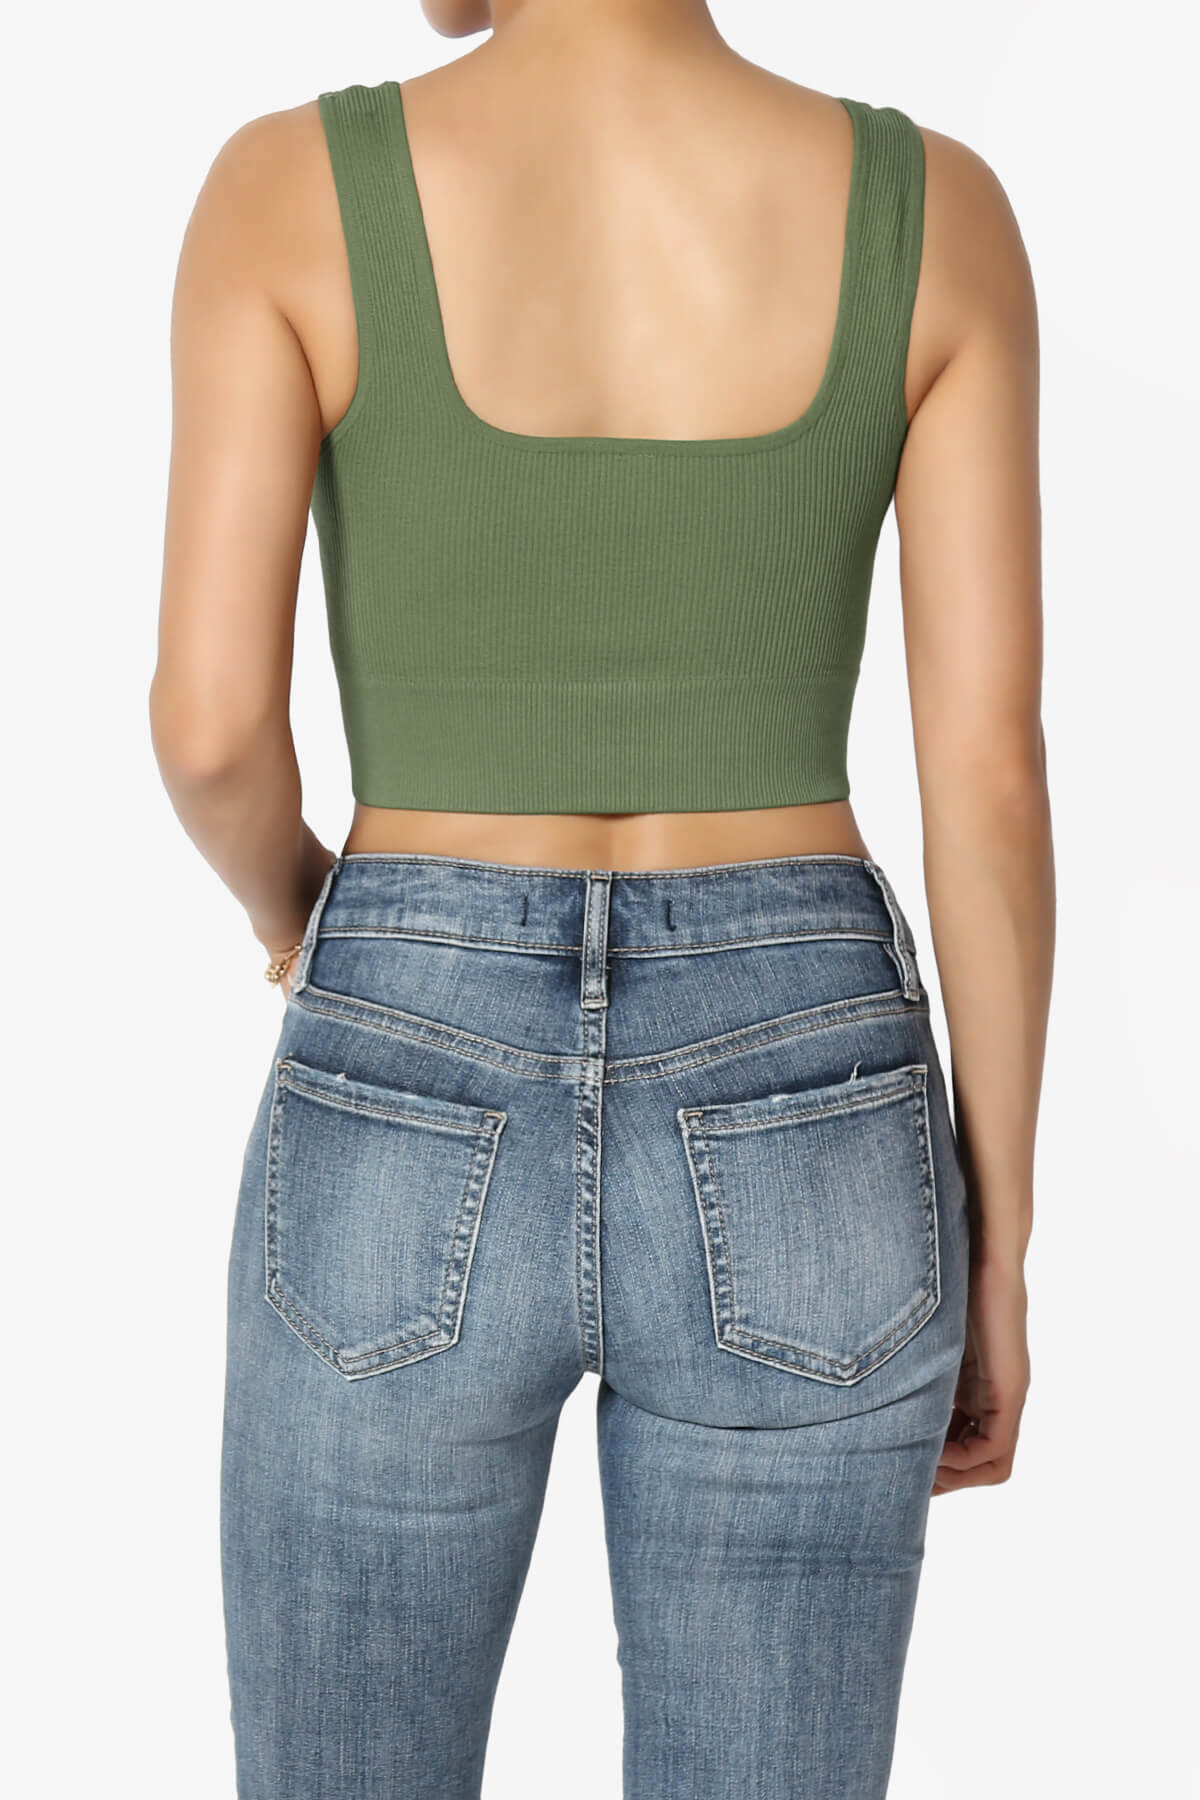 Load image into Gallery viewer, Hilde Ripped Seamless Square Neck Crop Tank Top DUSTY OLIVE_2
